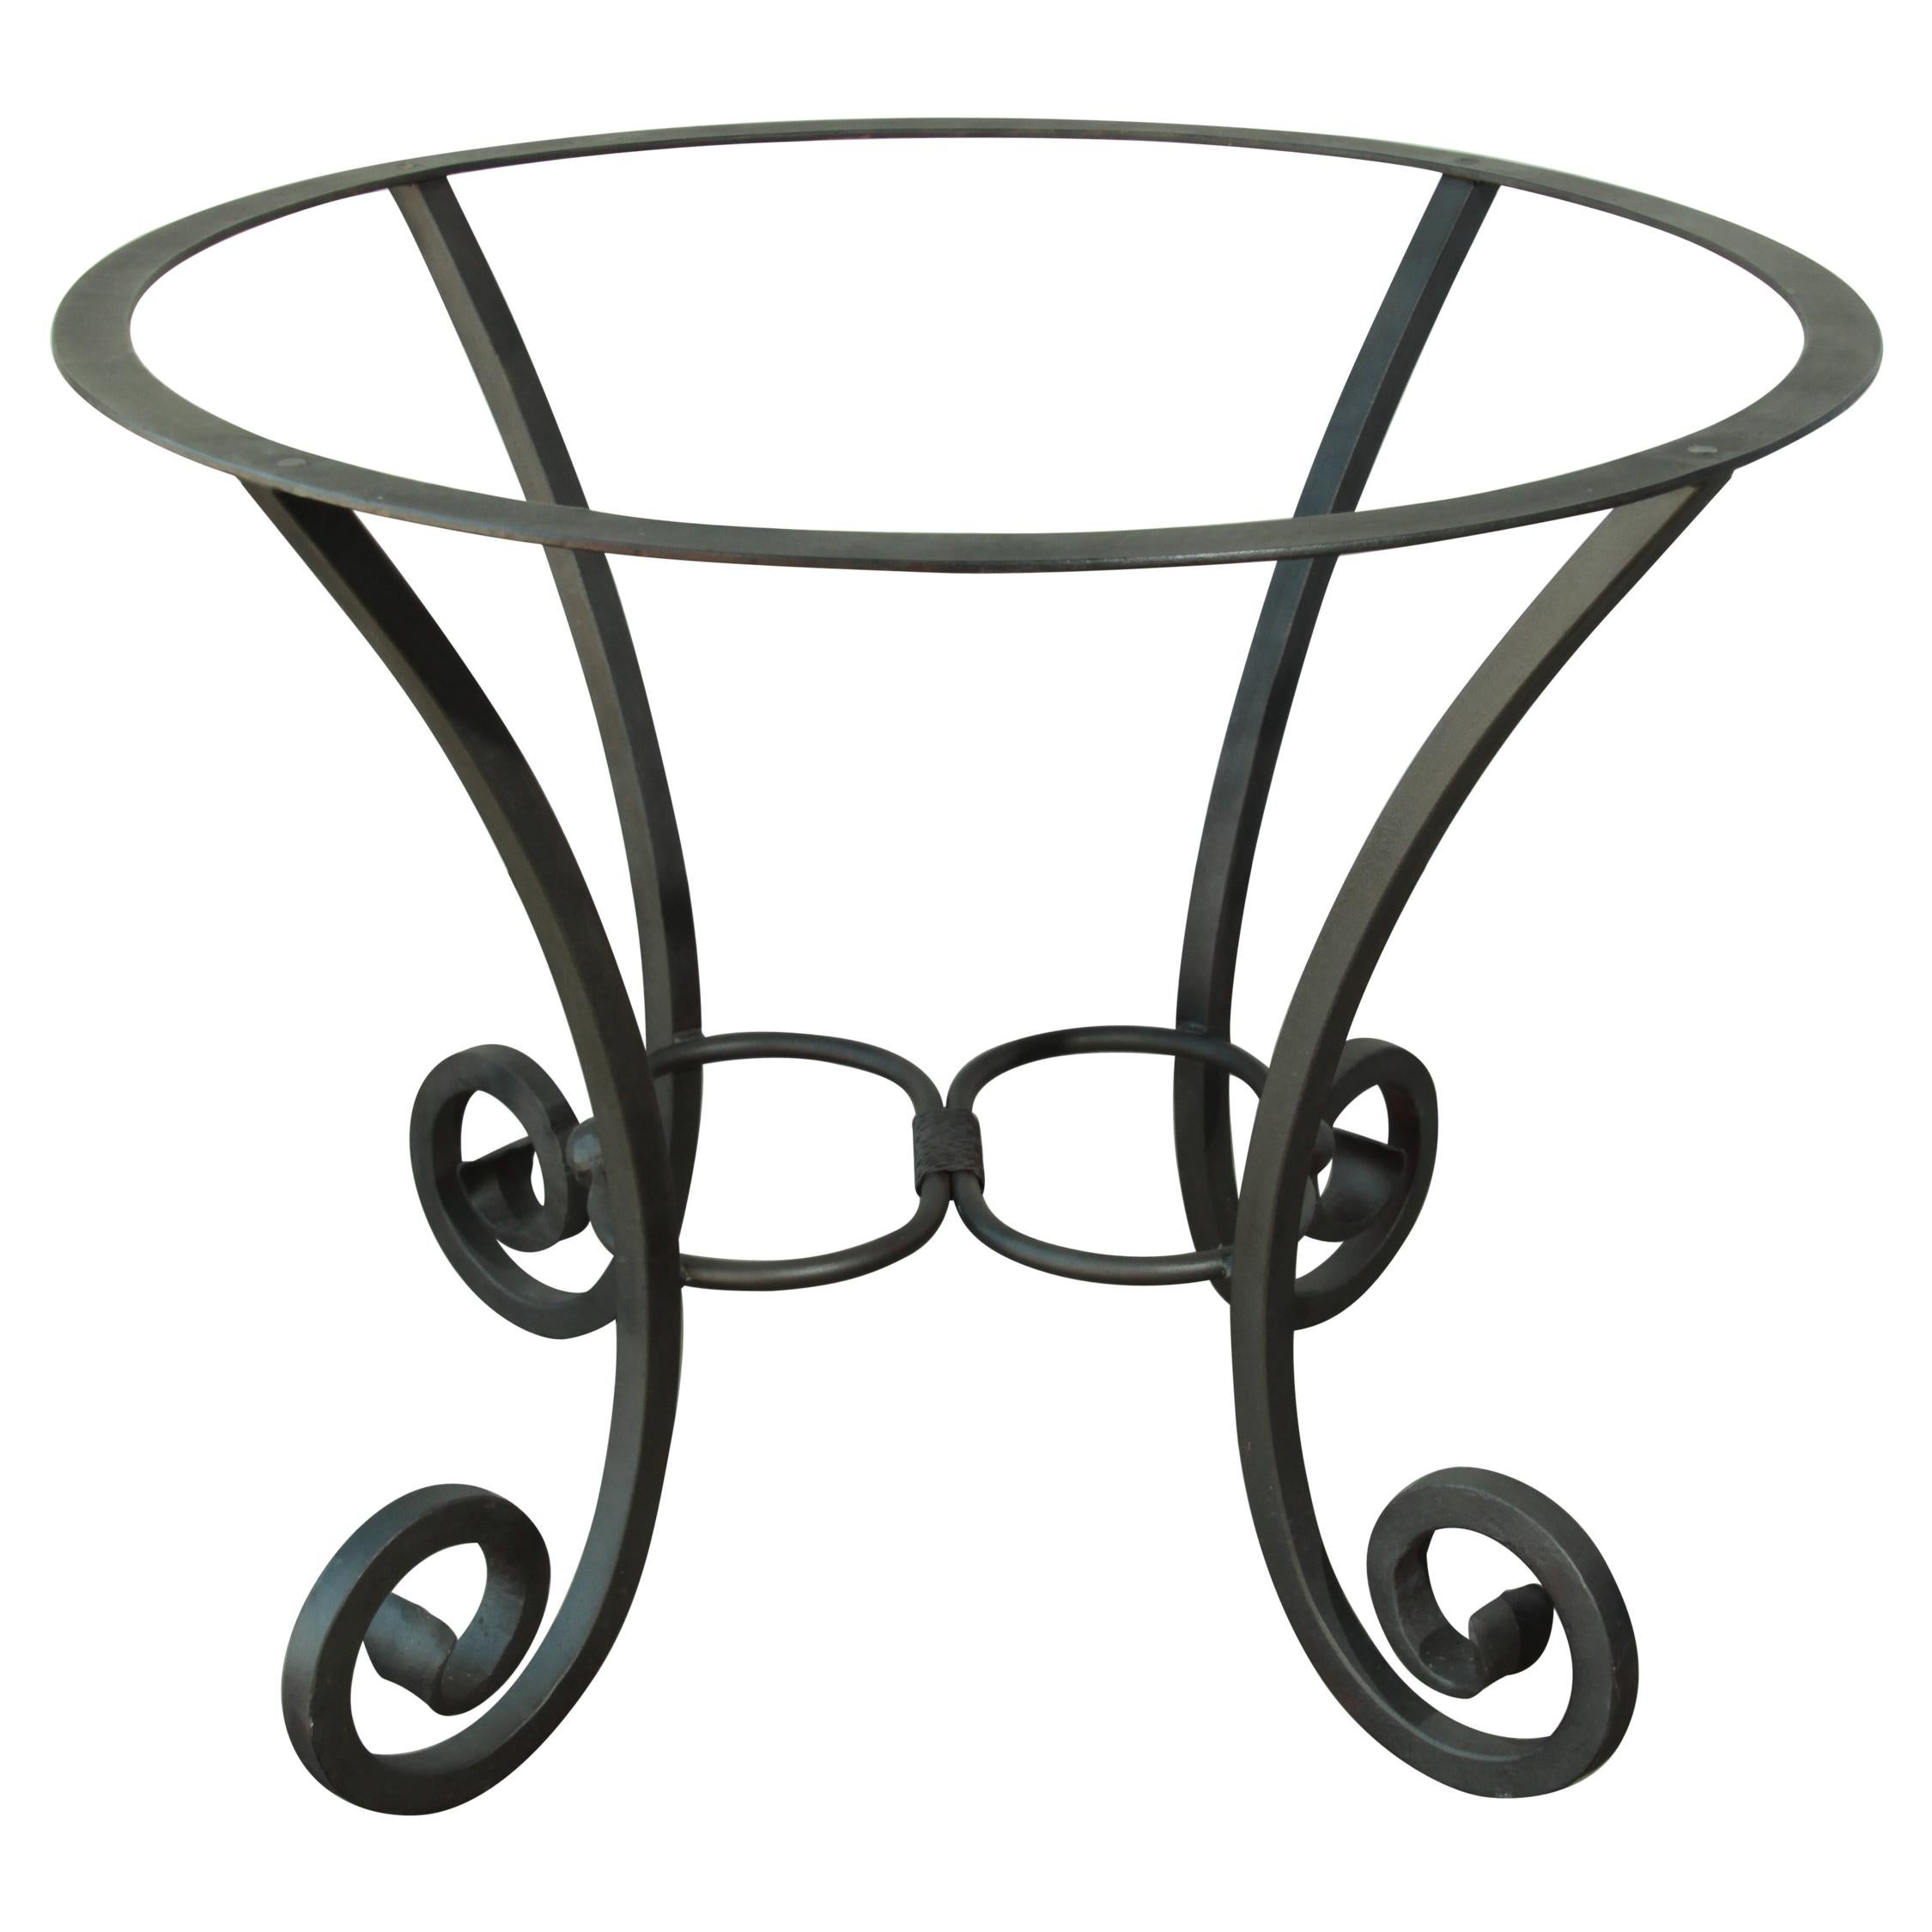 Spanish Wrought Iron Dining Table Pedestal Base Indoor or Outdoor